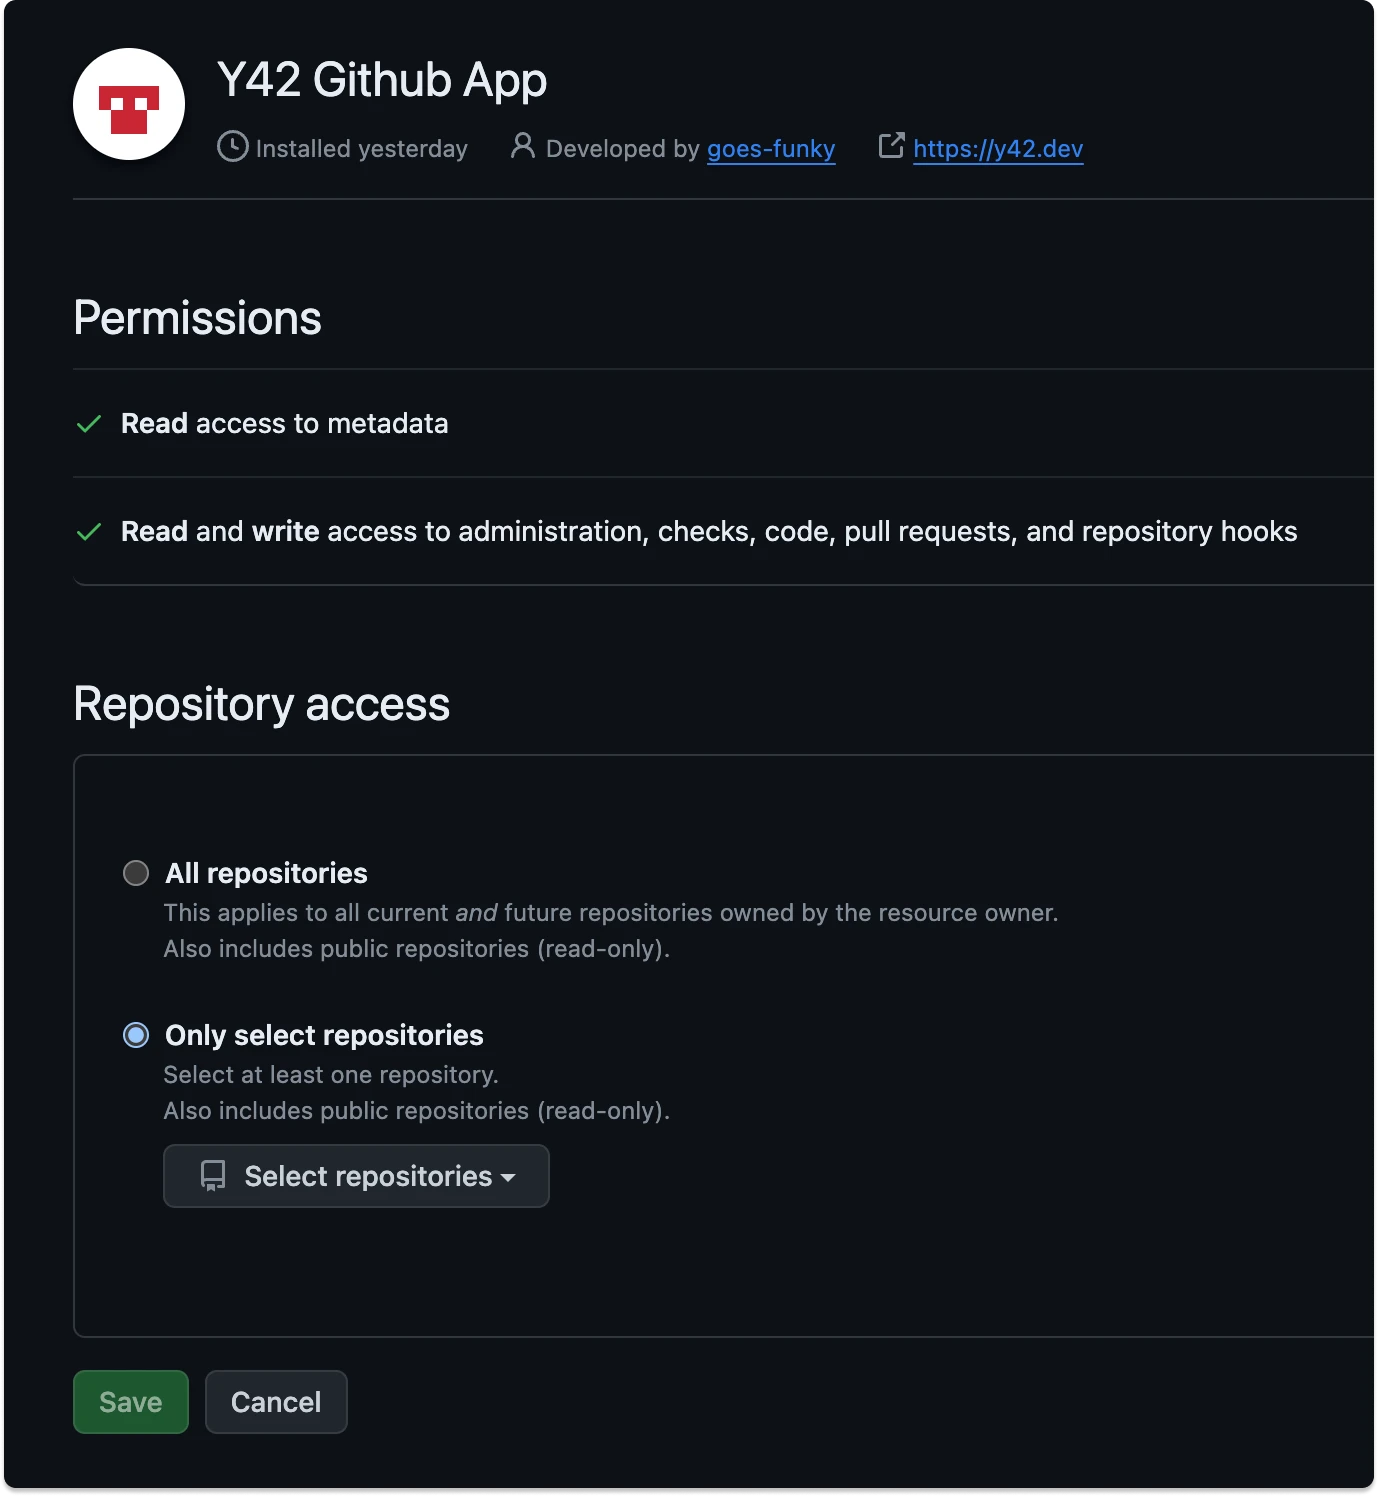 Choose which repositories to grant Y42 access to.